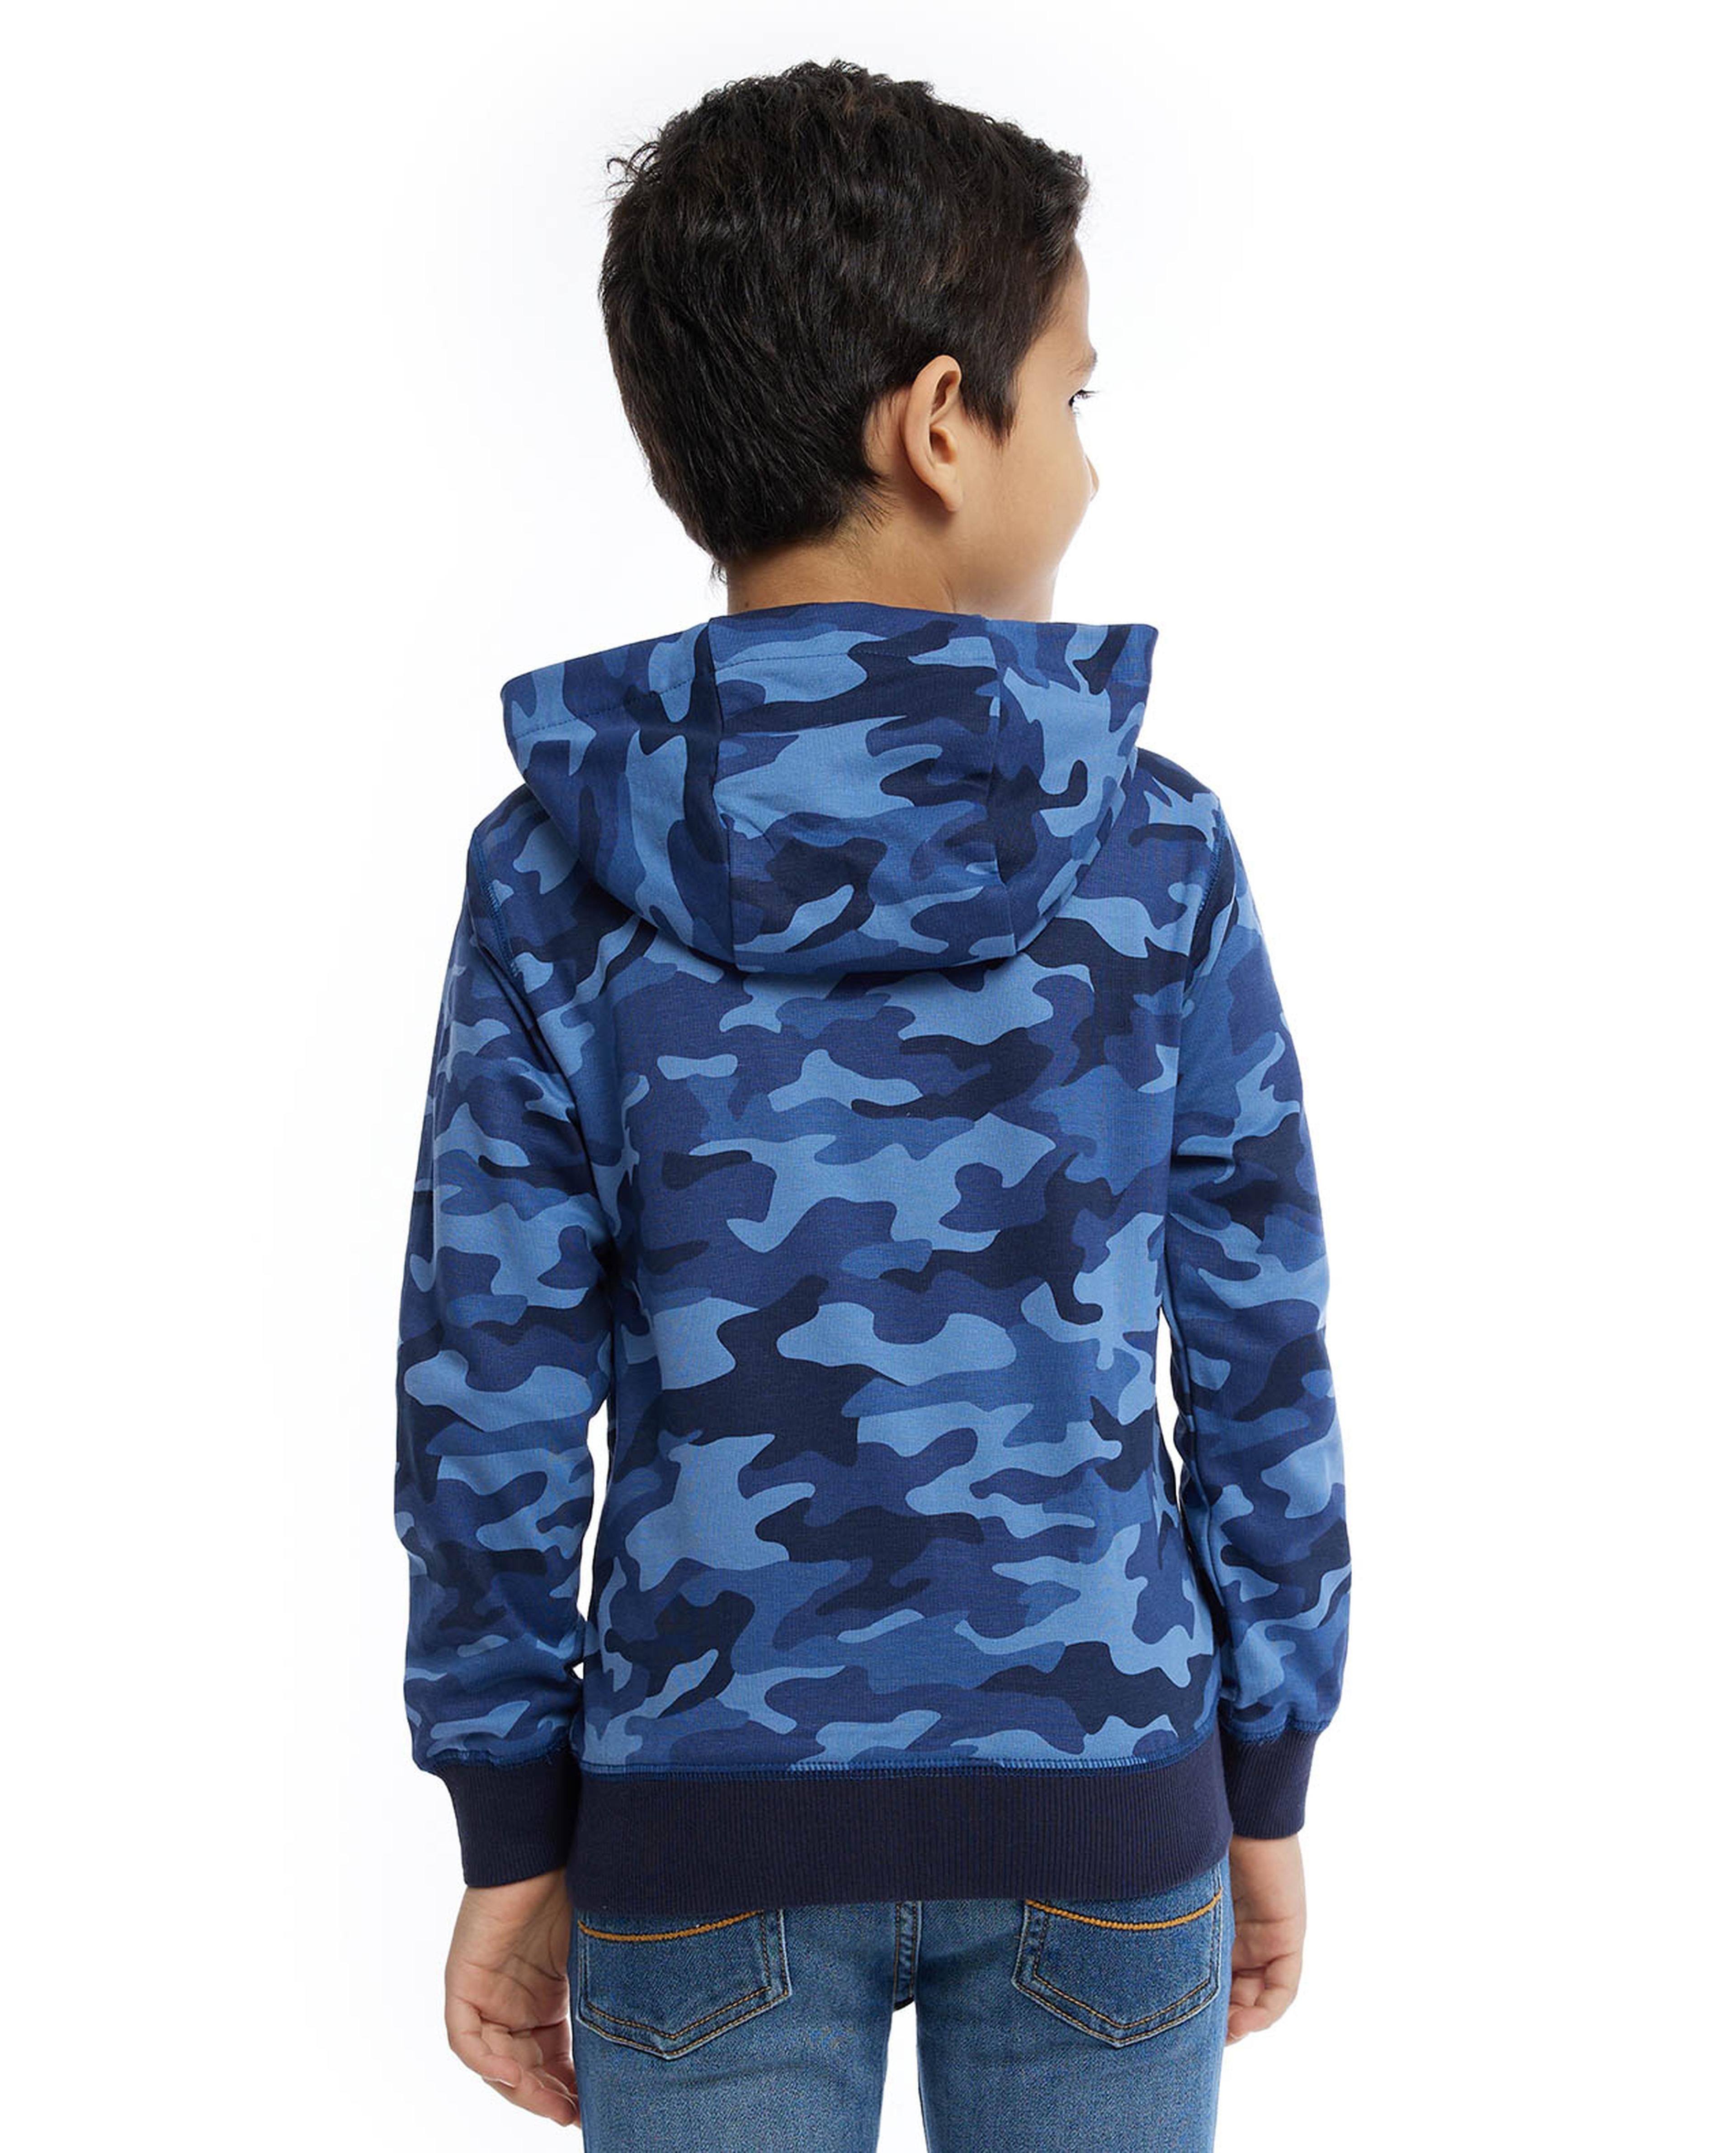 Camouflage Hooded Jacket with Zipper Closure